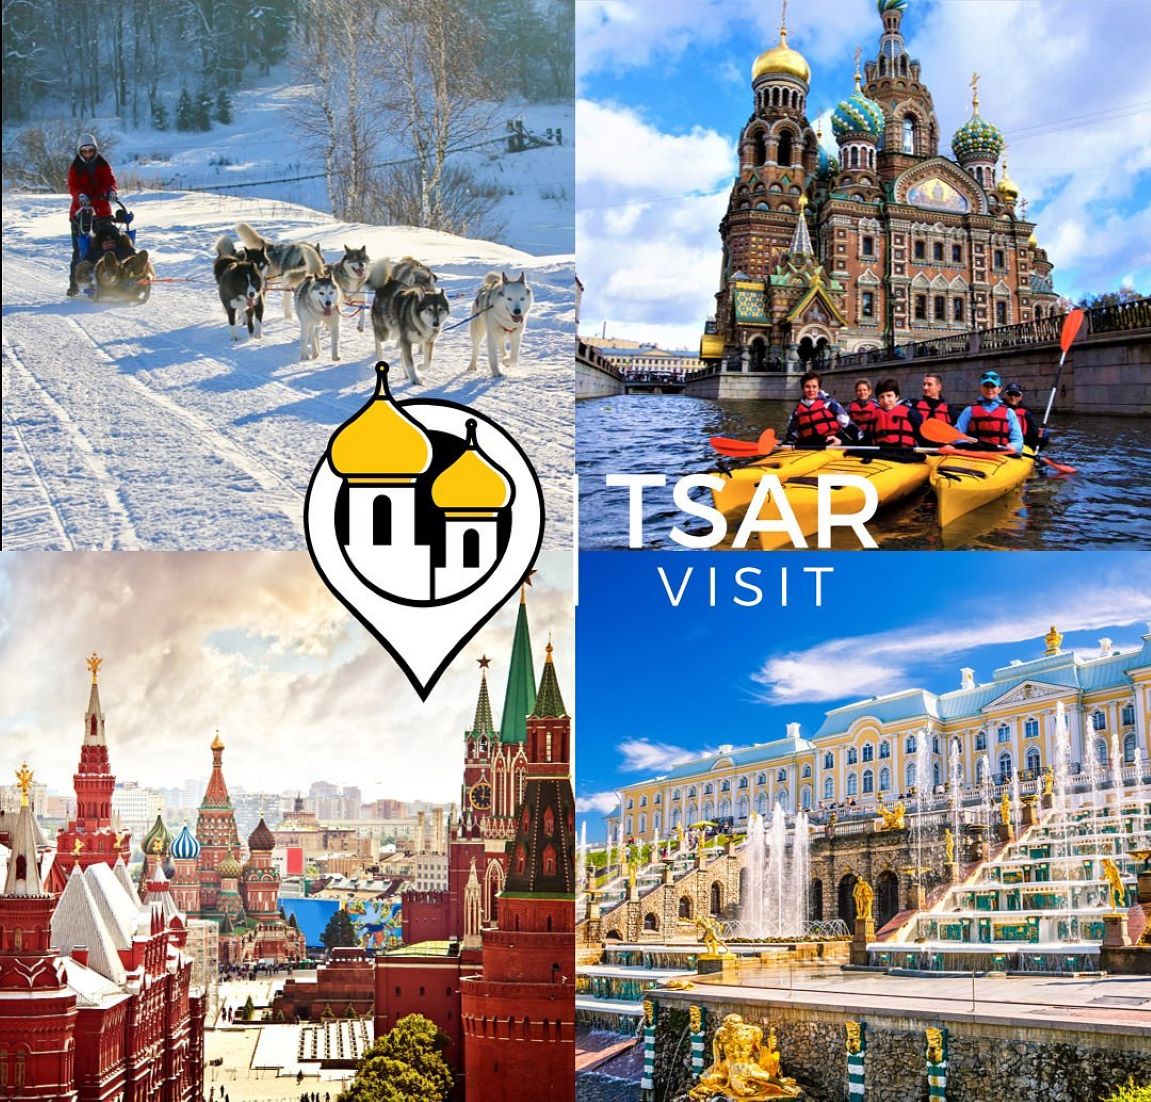 Russia To Promote Tourism Overseas Under Brand “Discover Russia”